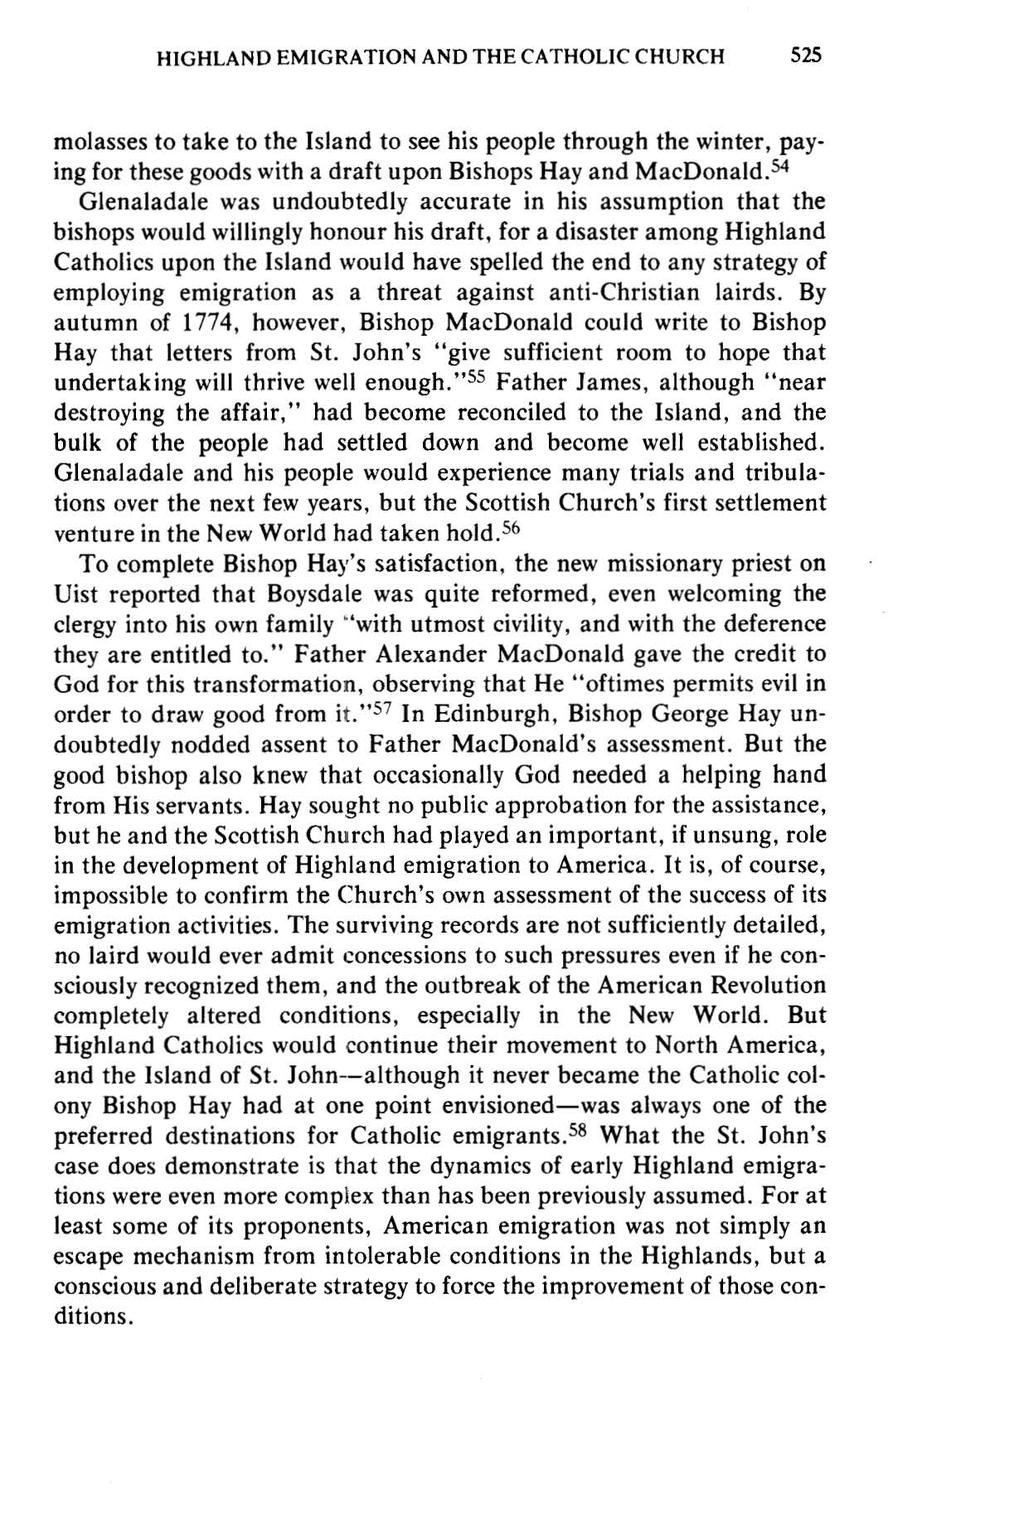 HIGHLAND EMIGRATION AND THE CATHOLIC CHURCH 525 molasses to take to the Island to see his people through the winter, paying for these goods with a draft upon Bishops Hay and MacDonald.